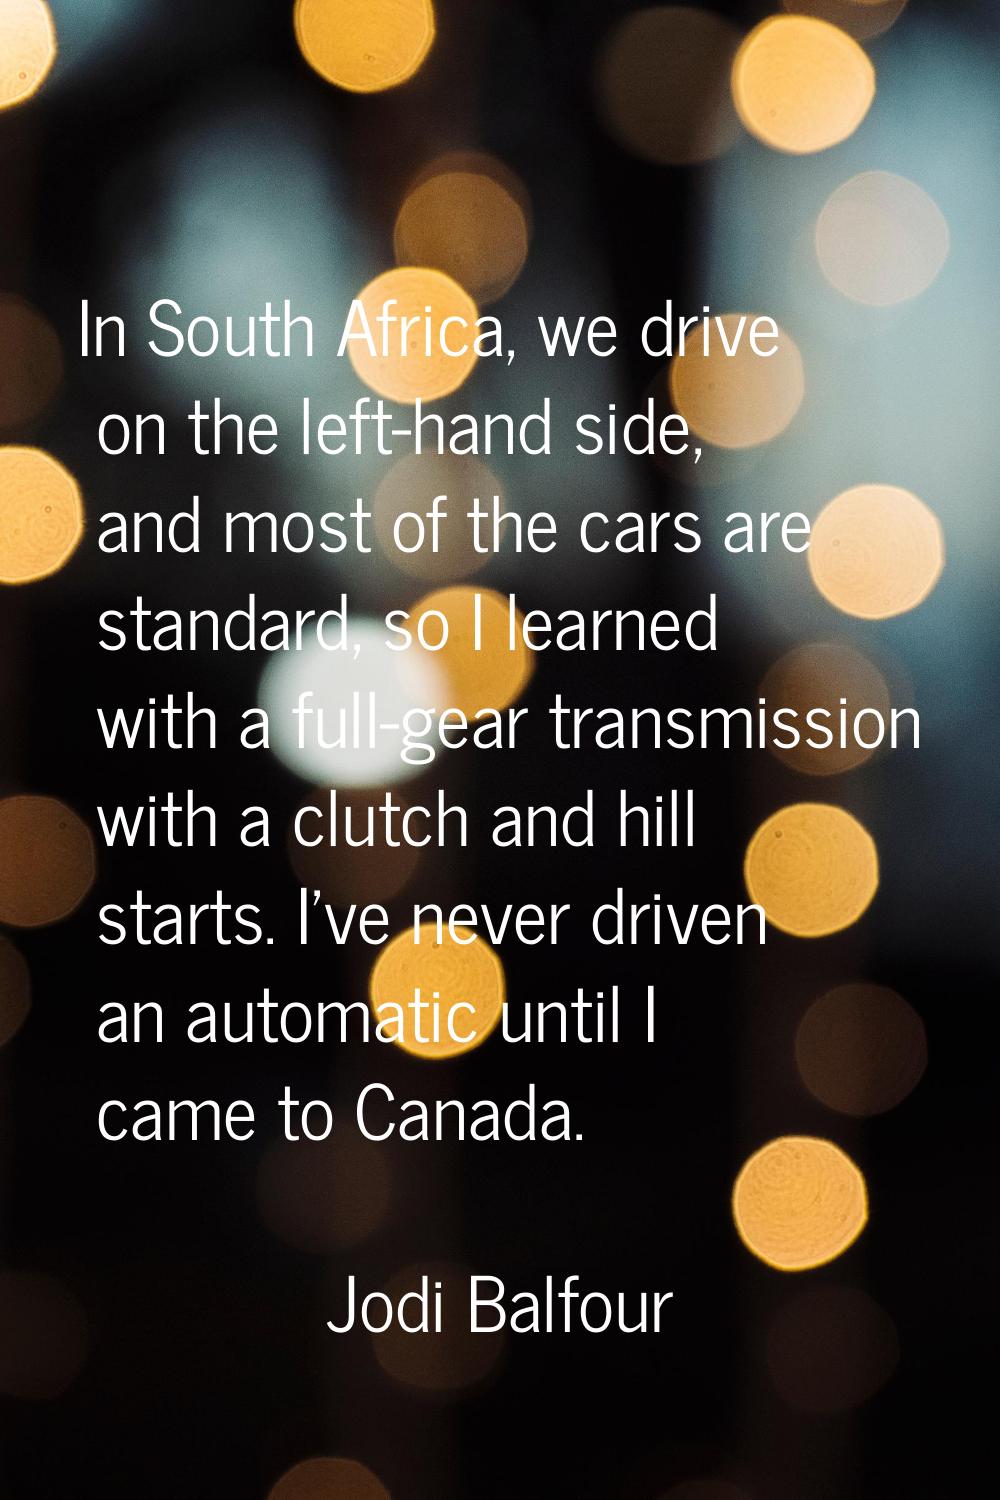 In South Africa, we drive on the left-hand side, and most of the cars are standard, so I learned wi